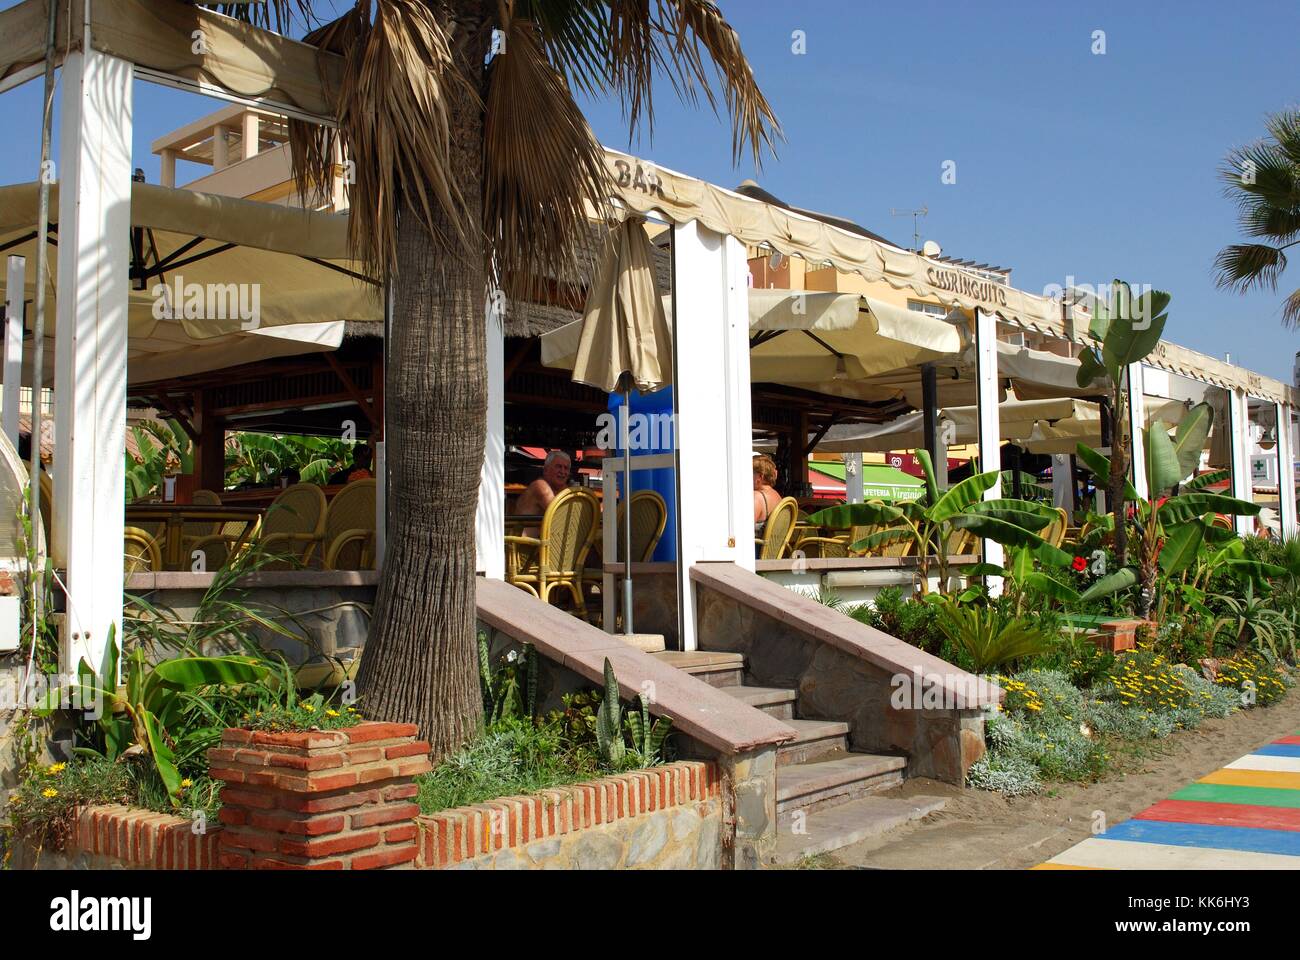 Tourists relaxing at a beach bar along the promenade, Torremolinos, Malaga Province, Andalusia, Spain, Western Europe. Stock Photo